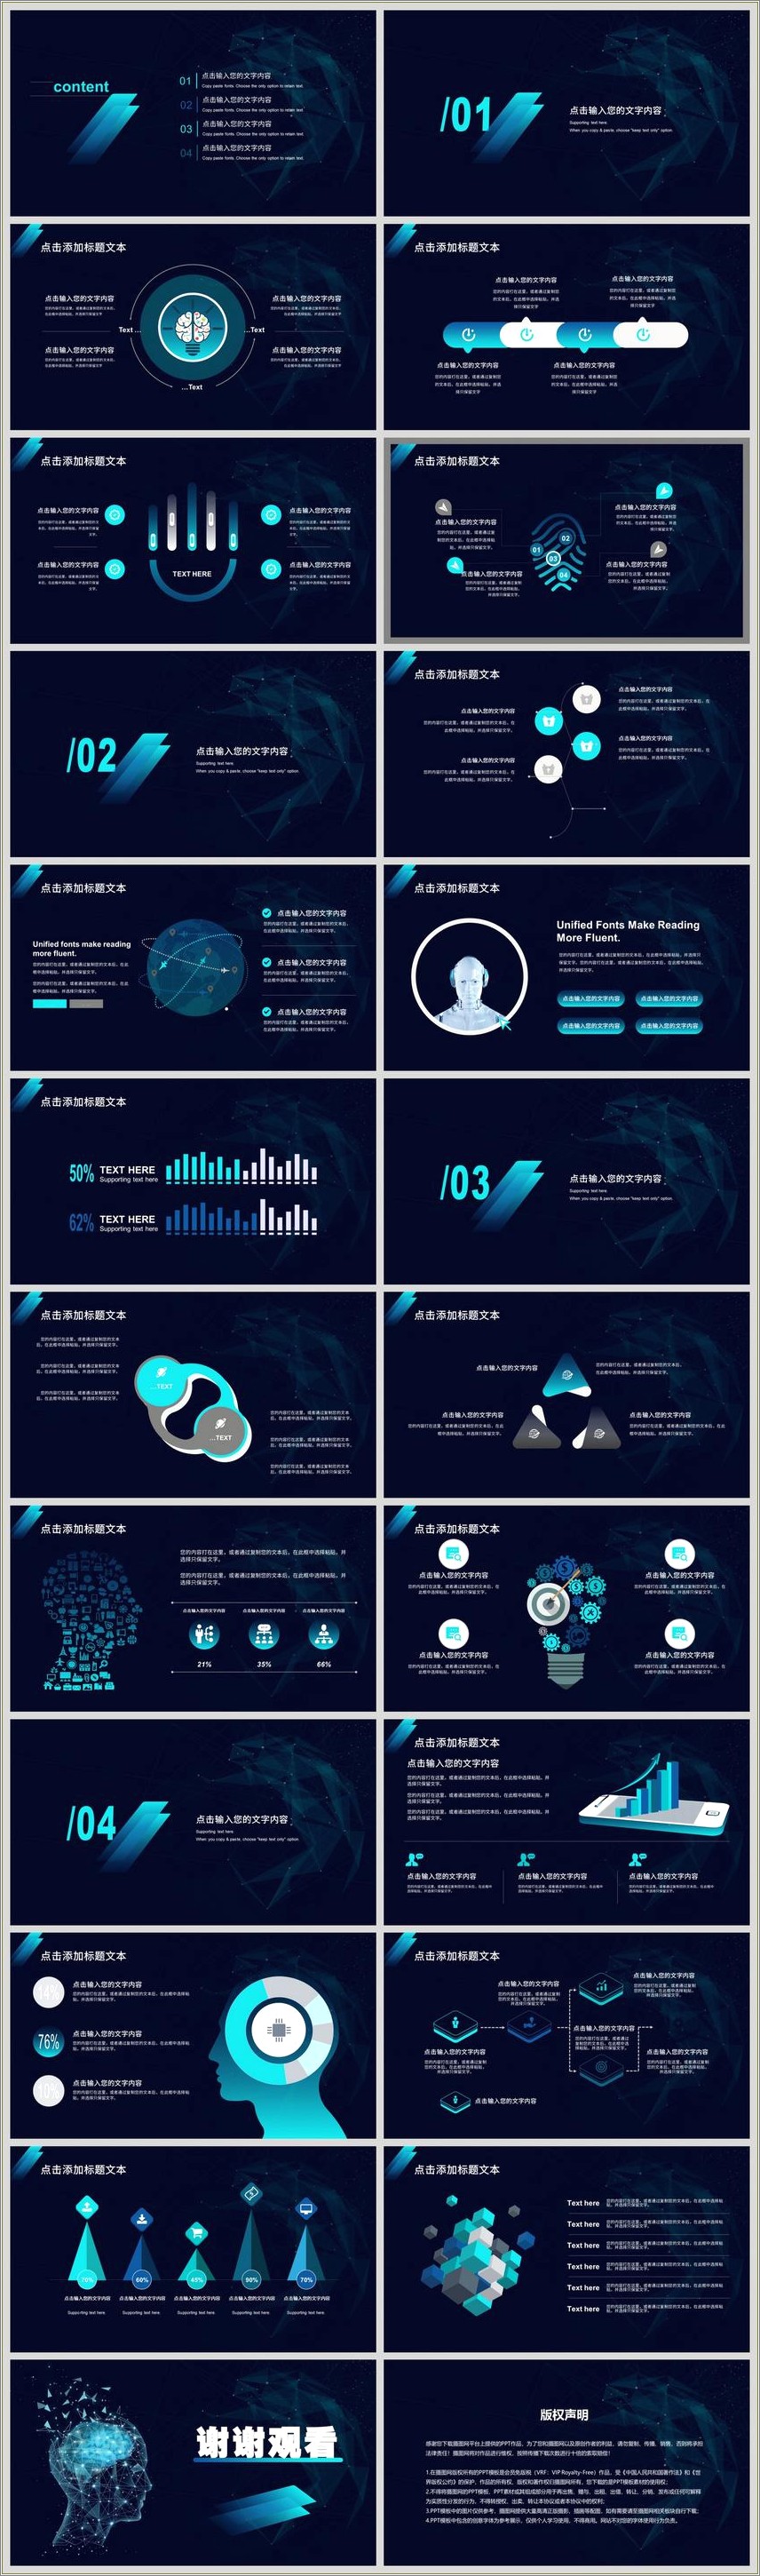 Artificial Intelligence Powerpoint Presentation Template Free Download